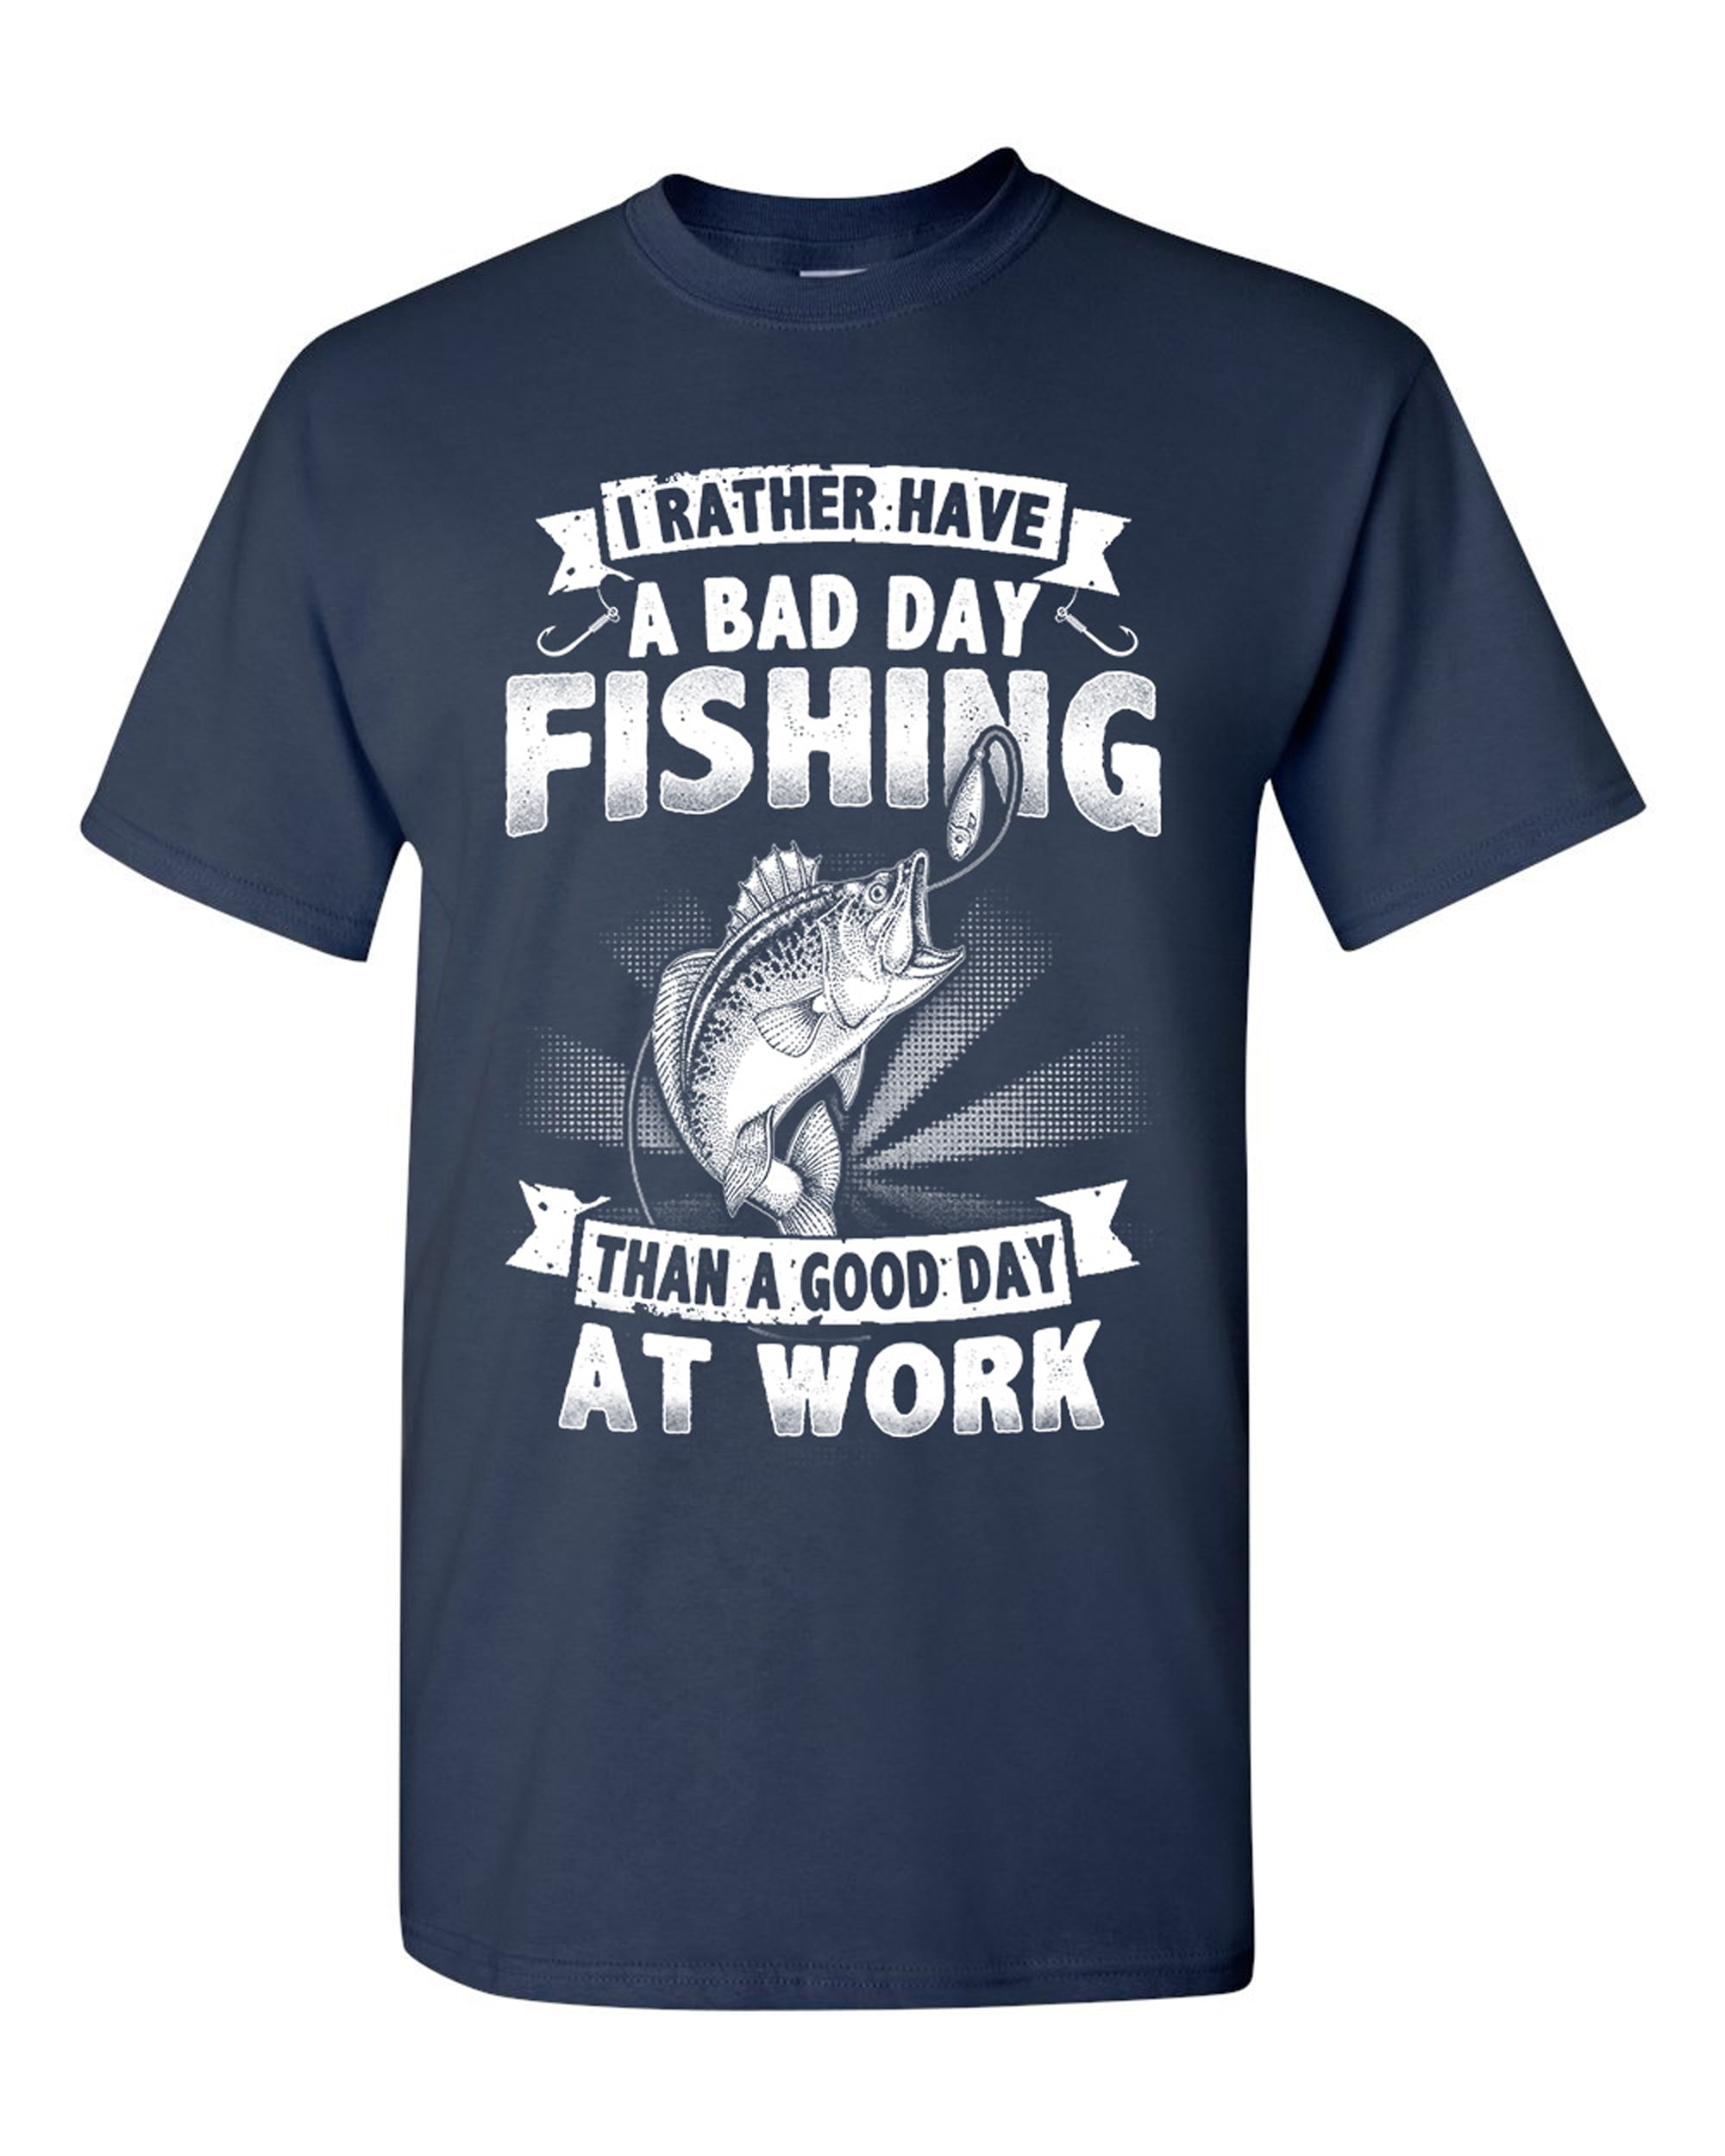 Long Sleeve Adult T-Shirt I Rather Have A Bad Day Fishing Than A